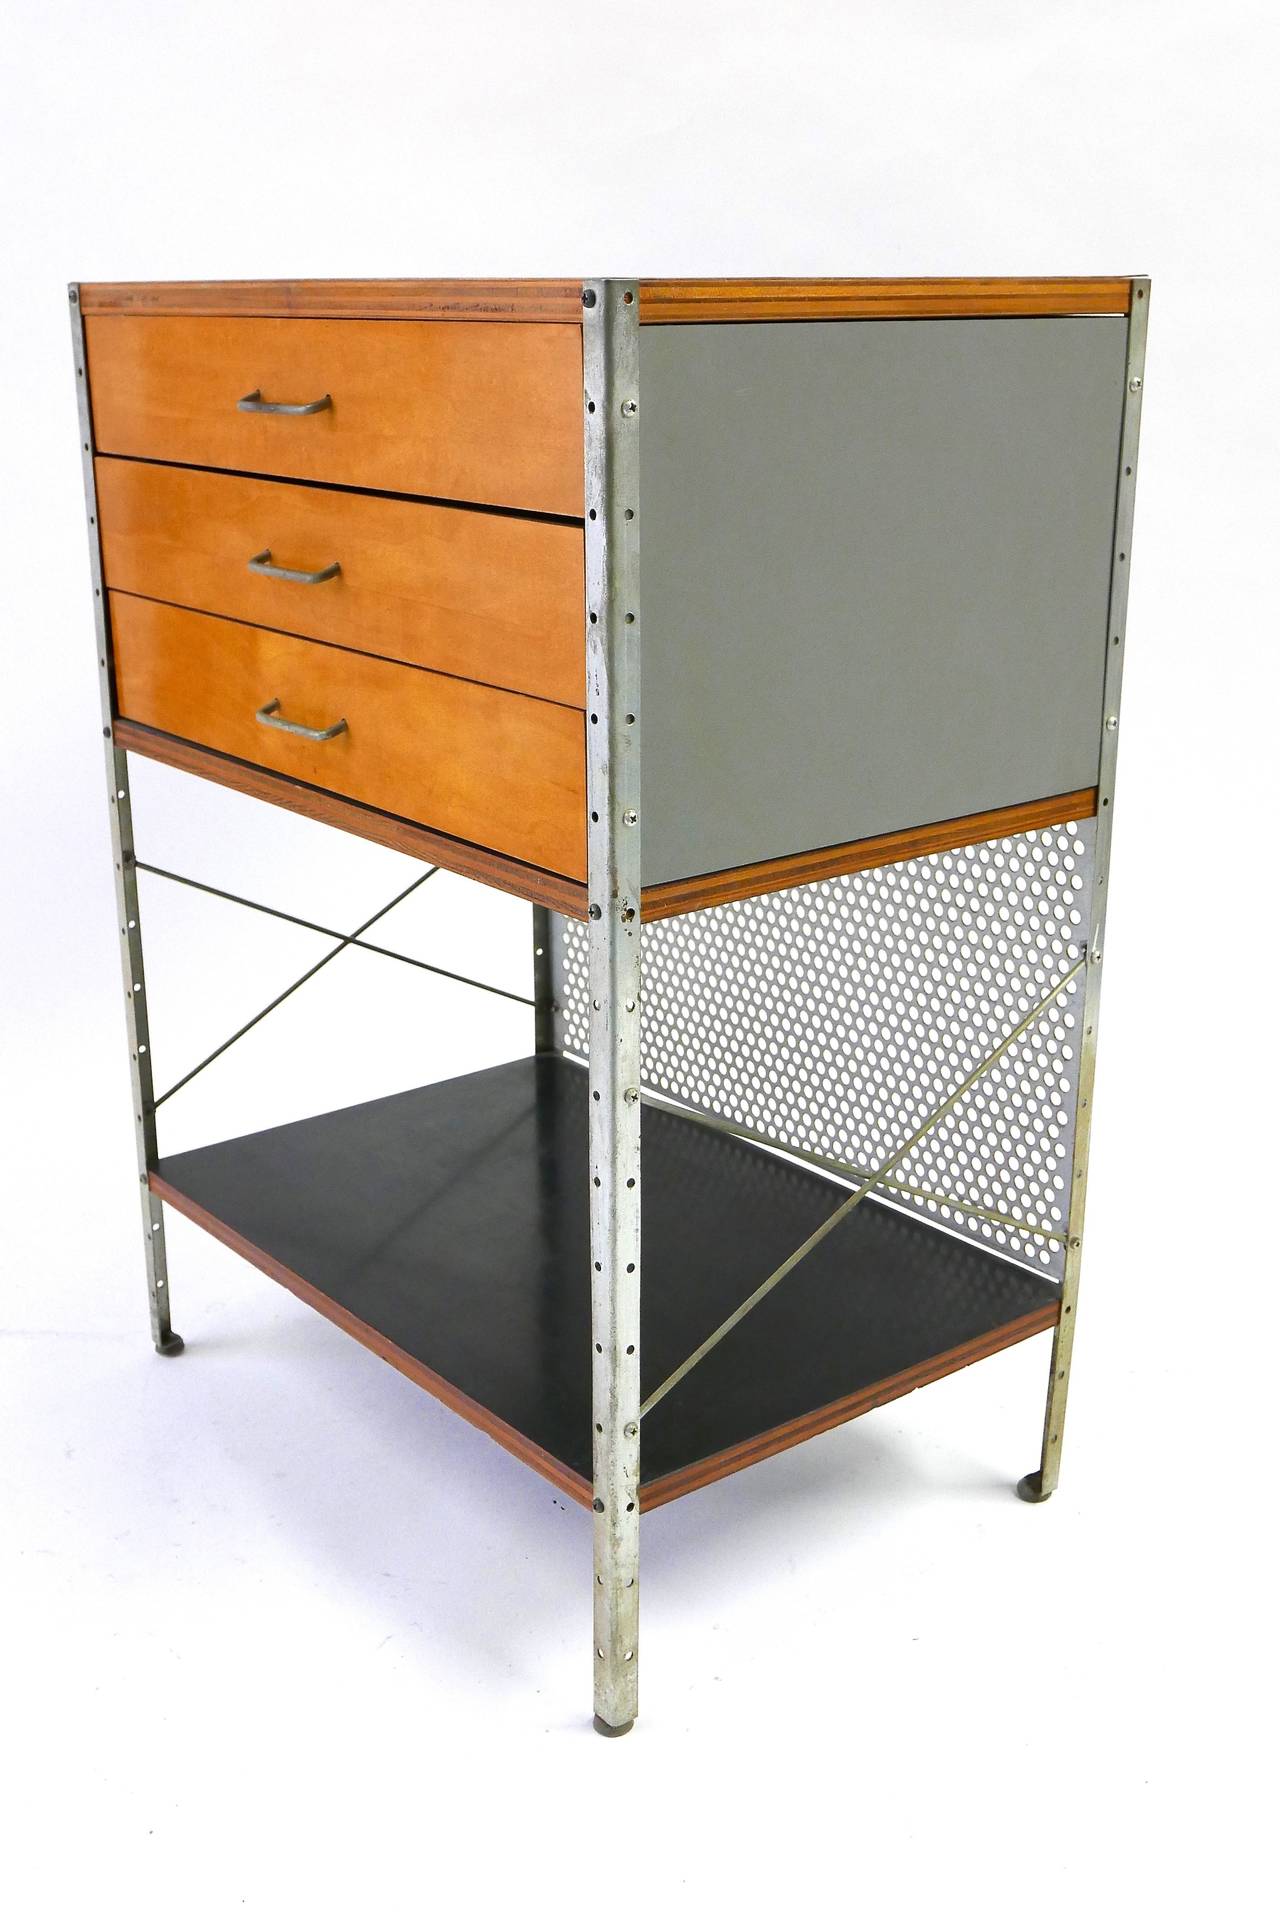 The Eames approach to designing case goods presented a system of interchangeable parts that could be easily adapted to a variety of office uses or home storage needs. This early example is from the first production in 1950.